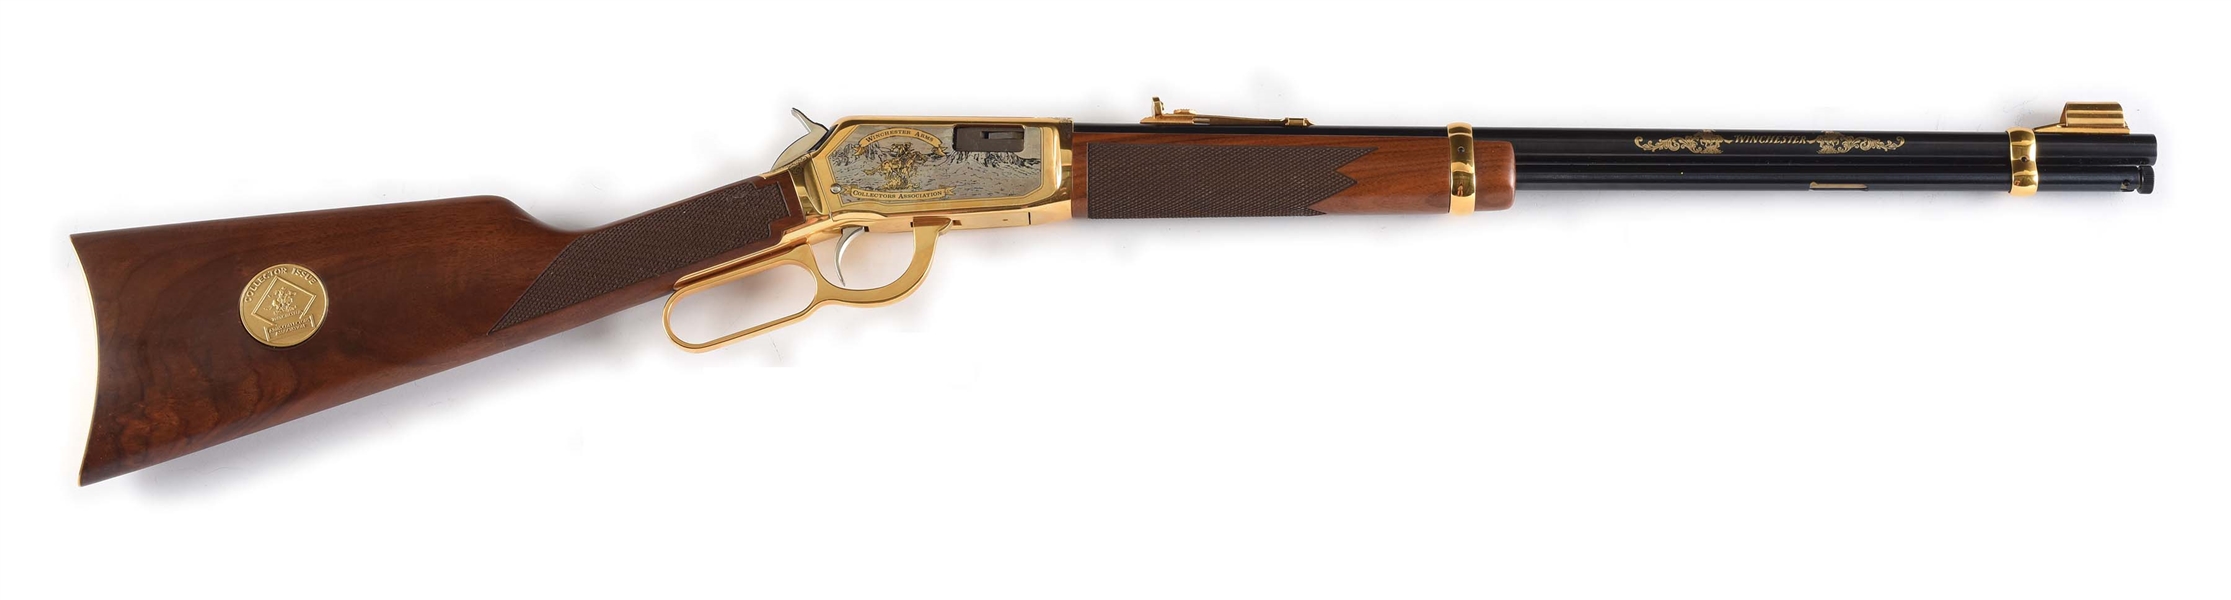 (M) BOXED WINCHESTER ARMS COLLECTORS ASSOCIATION MODEL 9422 LEVER ACTION CARBINE.